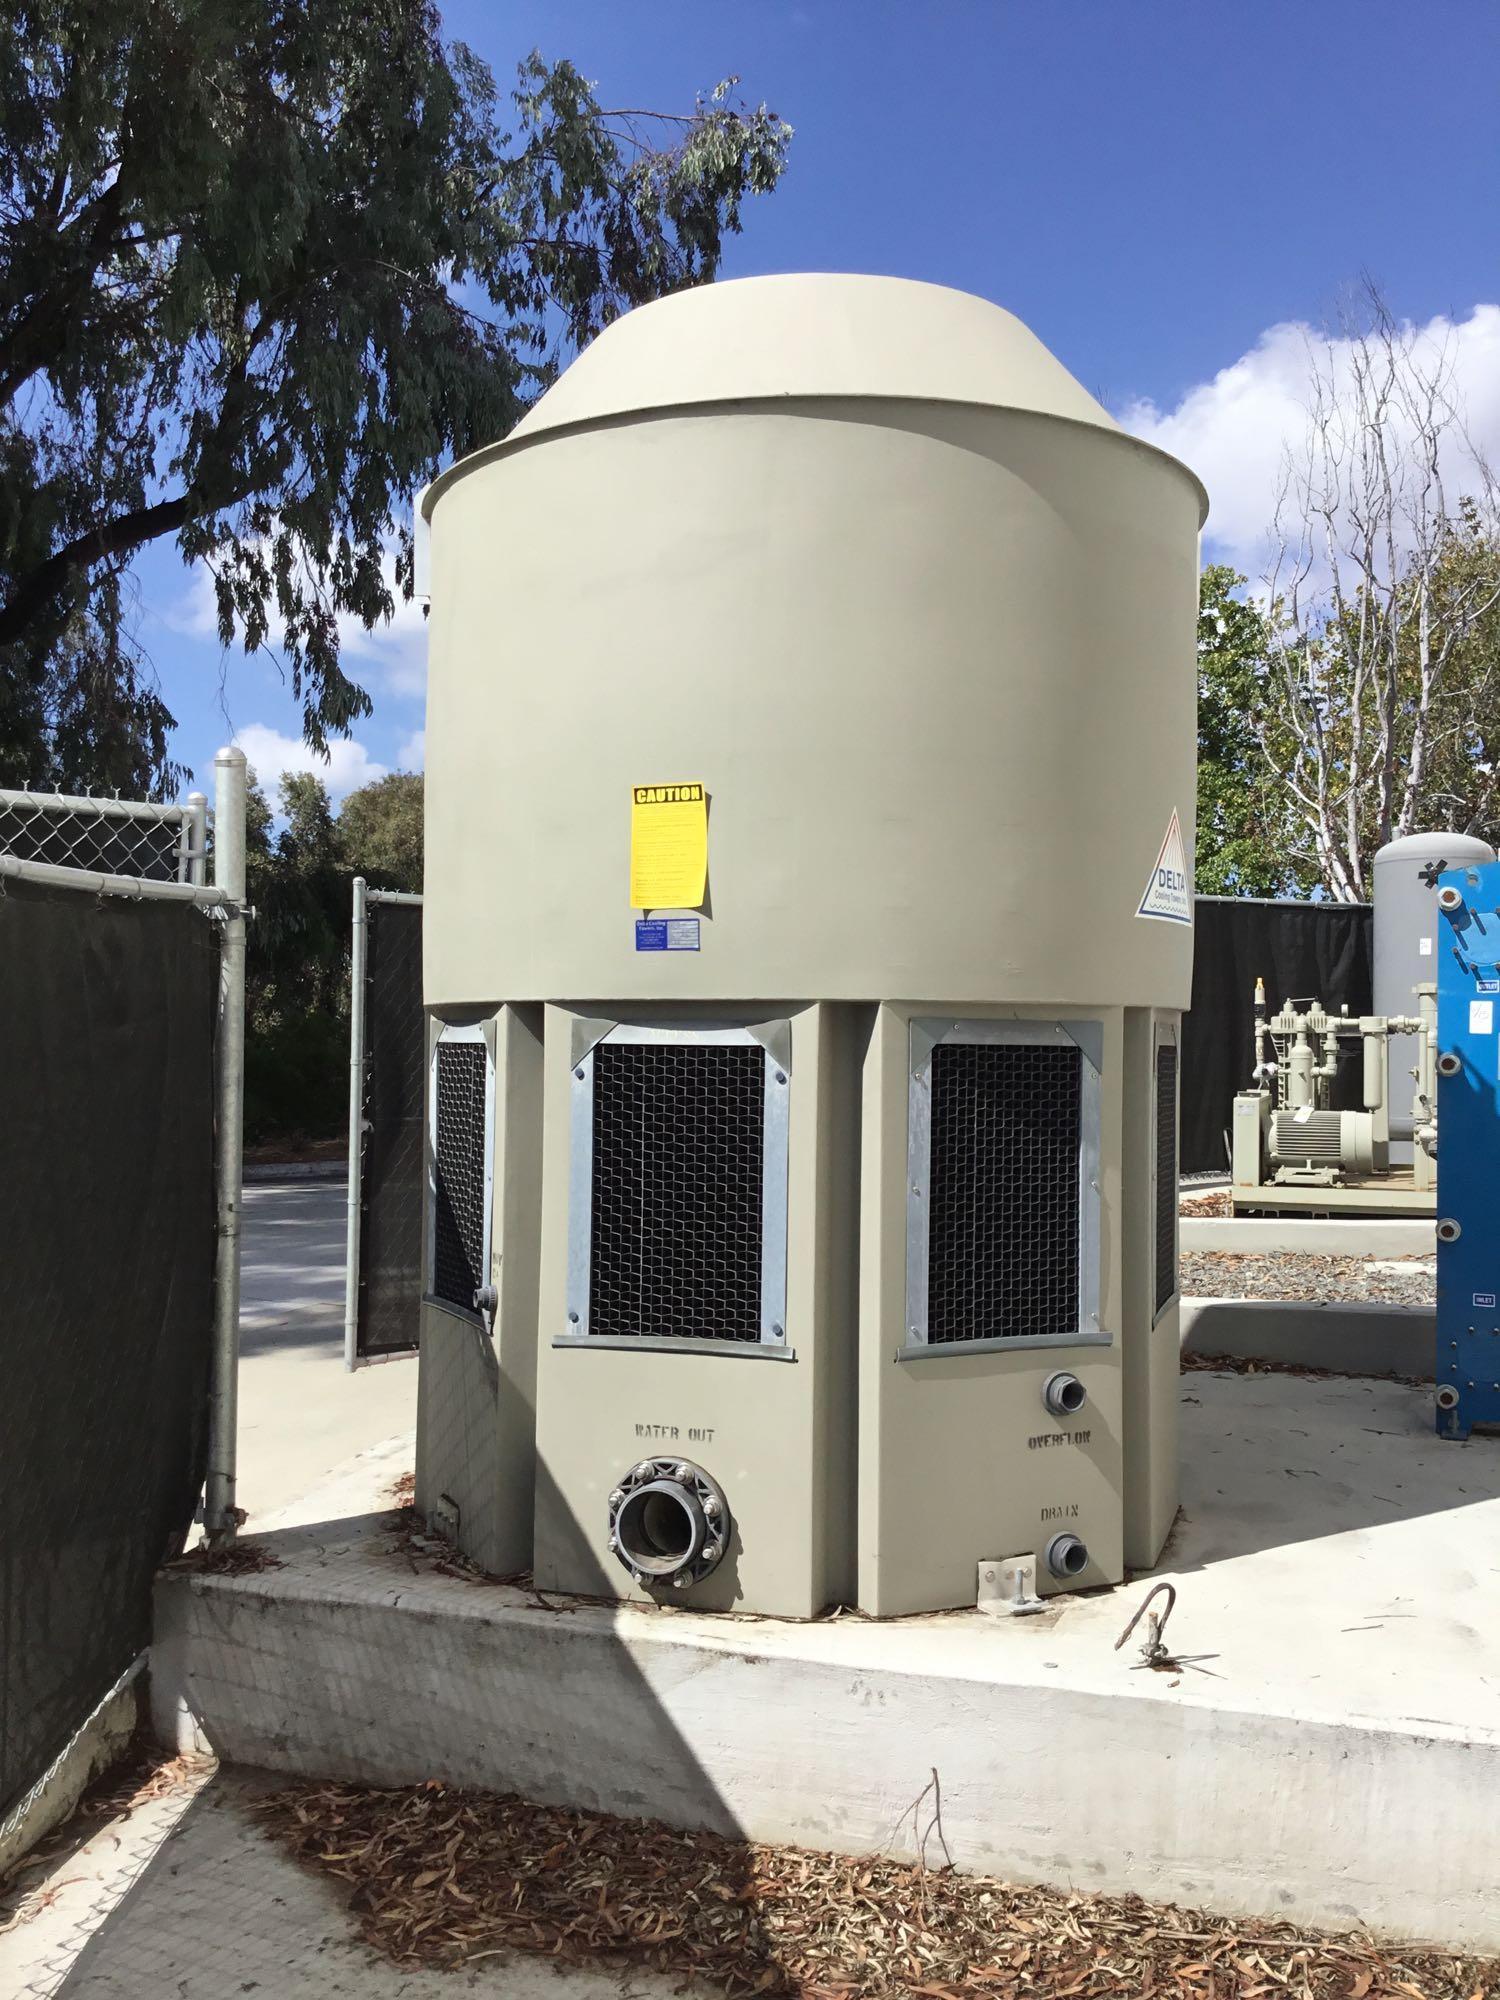 Delta Cooling Towers Induced Draft Tower and WCR Plate Heat Exchanger